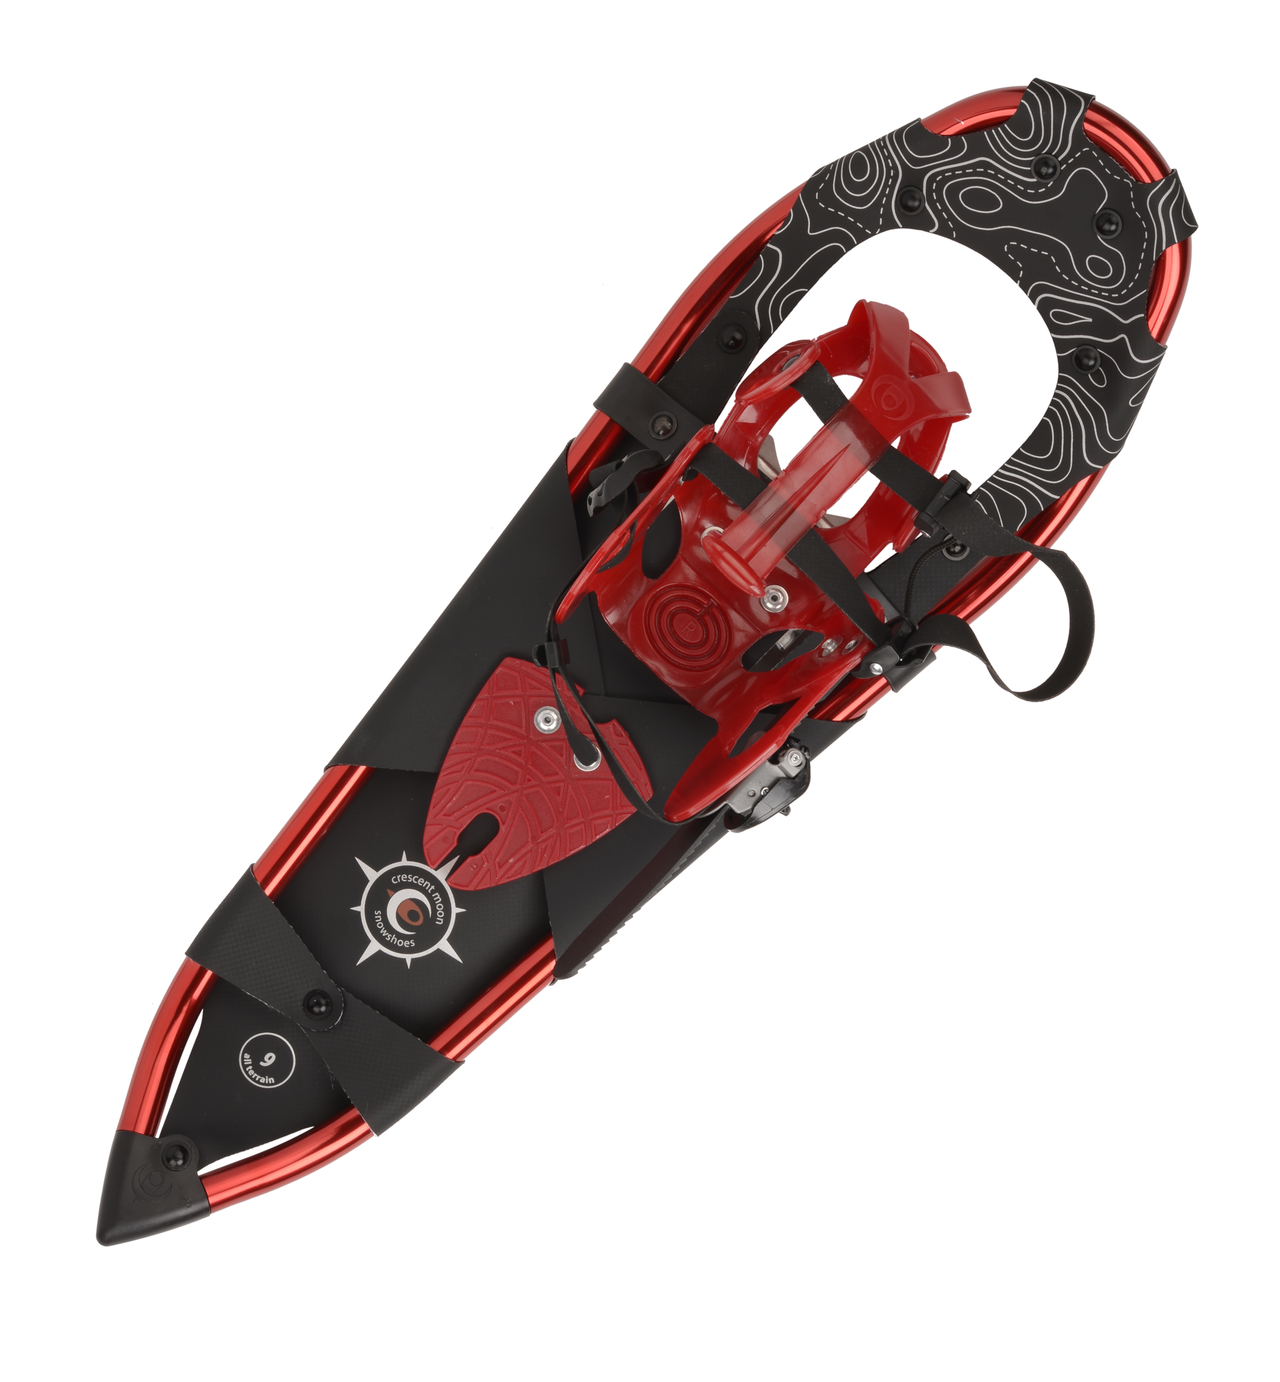 All-Terrain Snowshoes - Sawtooth 27